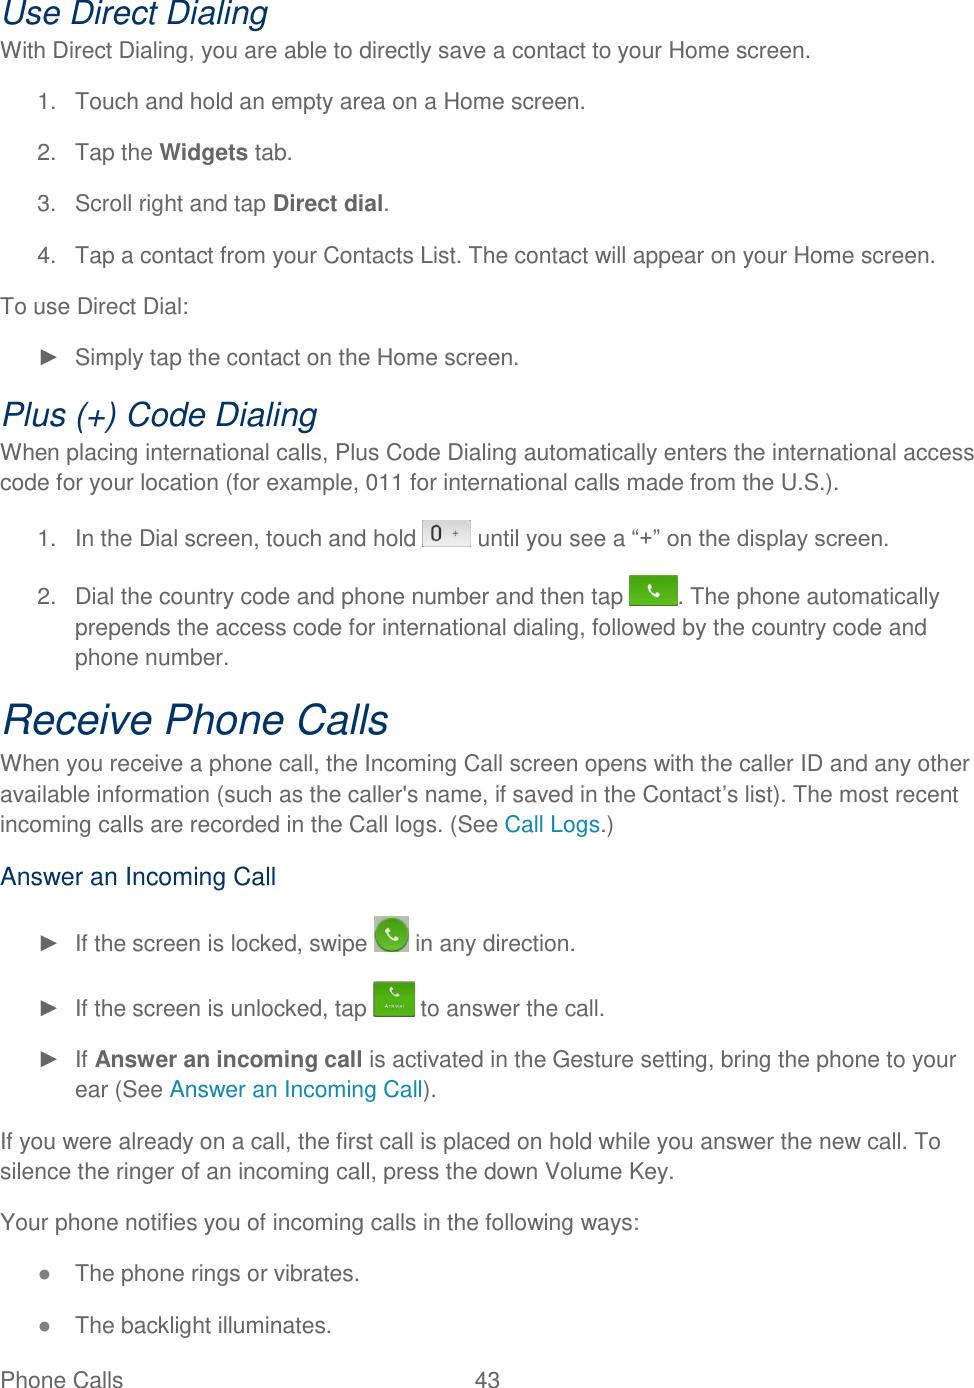  Phone Calls  43   Use Direct Dialing With Direct Dialing, you are able to directly save a contact to your Home screen. 1.  Touch and hold an empty area on a Home screen.  2.  Tap the Widgets tab. 3.  Scroll right and tap Direct dial. 4.  Tap a contact from your Contacts List. The contact will appear on your Home screen. To use Direct Dial: ►  Simply tap the contact on the Home screen. Plus (+) Code Dialing When placing international calls, Plus Code Dialing automatically enters the international access code for your location (for example, 011 for international calls made from the U.S.). 1.  In the Dial screen, touch and hold   until you see a ―+‖ on the display screen. 2.  Dial the country code and phone number and then tap  . The phone automatically prepends the access code for international dialing, followed by the country code and phone number. Receive Phone Calls When you receive a phone call, the Incoming Call screen opens with the caller ID and any other available information (such as the caller&apos;s name, if saved in the Contact‘s list). The most recent incoming calls are recorded in the Call logs. (See Call Logs.) Answer an Incoming Call ►  If the screen is locked, swipe   in any direction. ►  If the screen is unlocked, tap   to answer the call. ► If Answer an incoming call is activated in the Gesture setting, bring the phone to your ear (See Answer an Incoming Call). If you were already on a call, the first call is placed on hold while you answer the new call. To silence the ringer of an incoming call, press the down Volume Key. Your phone notifies you of incoming calls in the following ways: ● The phone rings or vibrates. ● The backlight illuminates. 